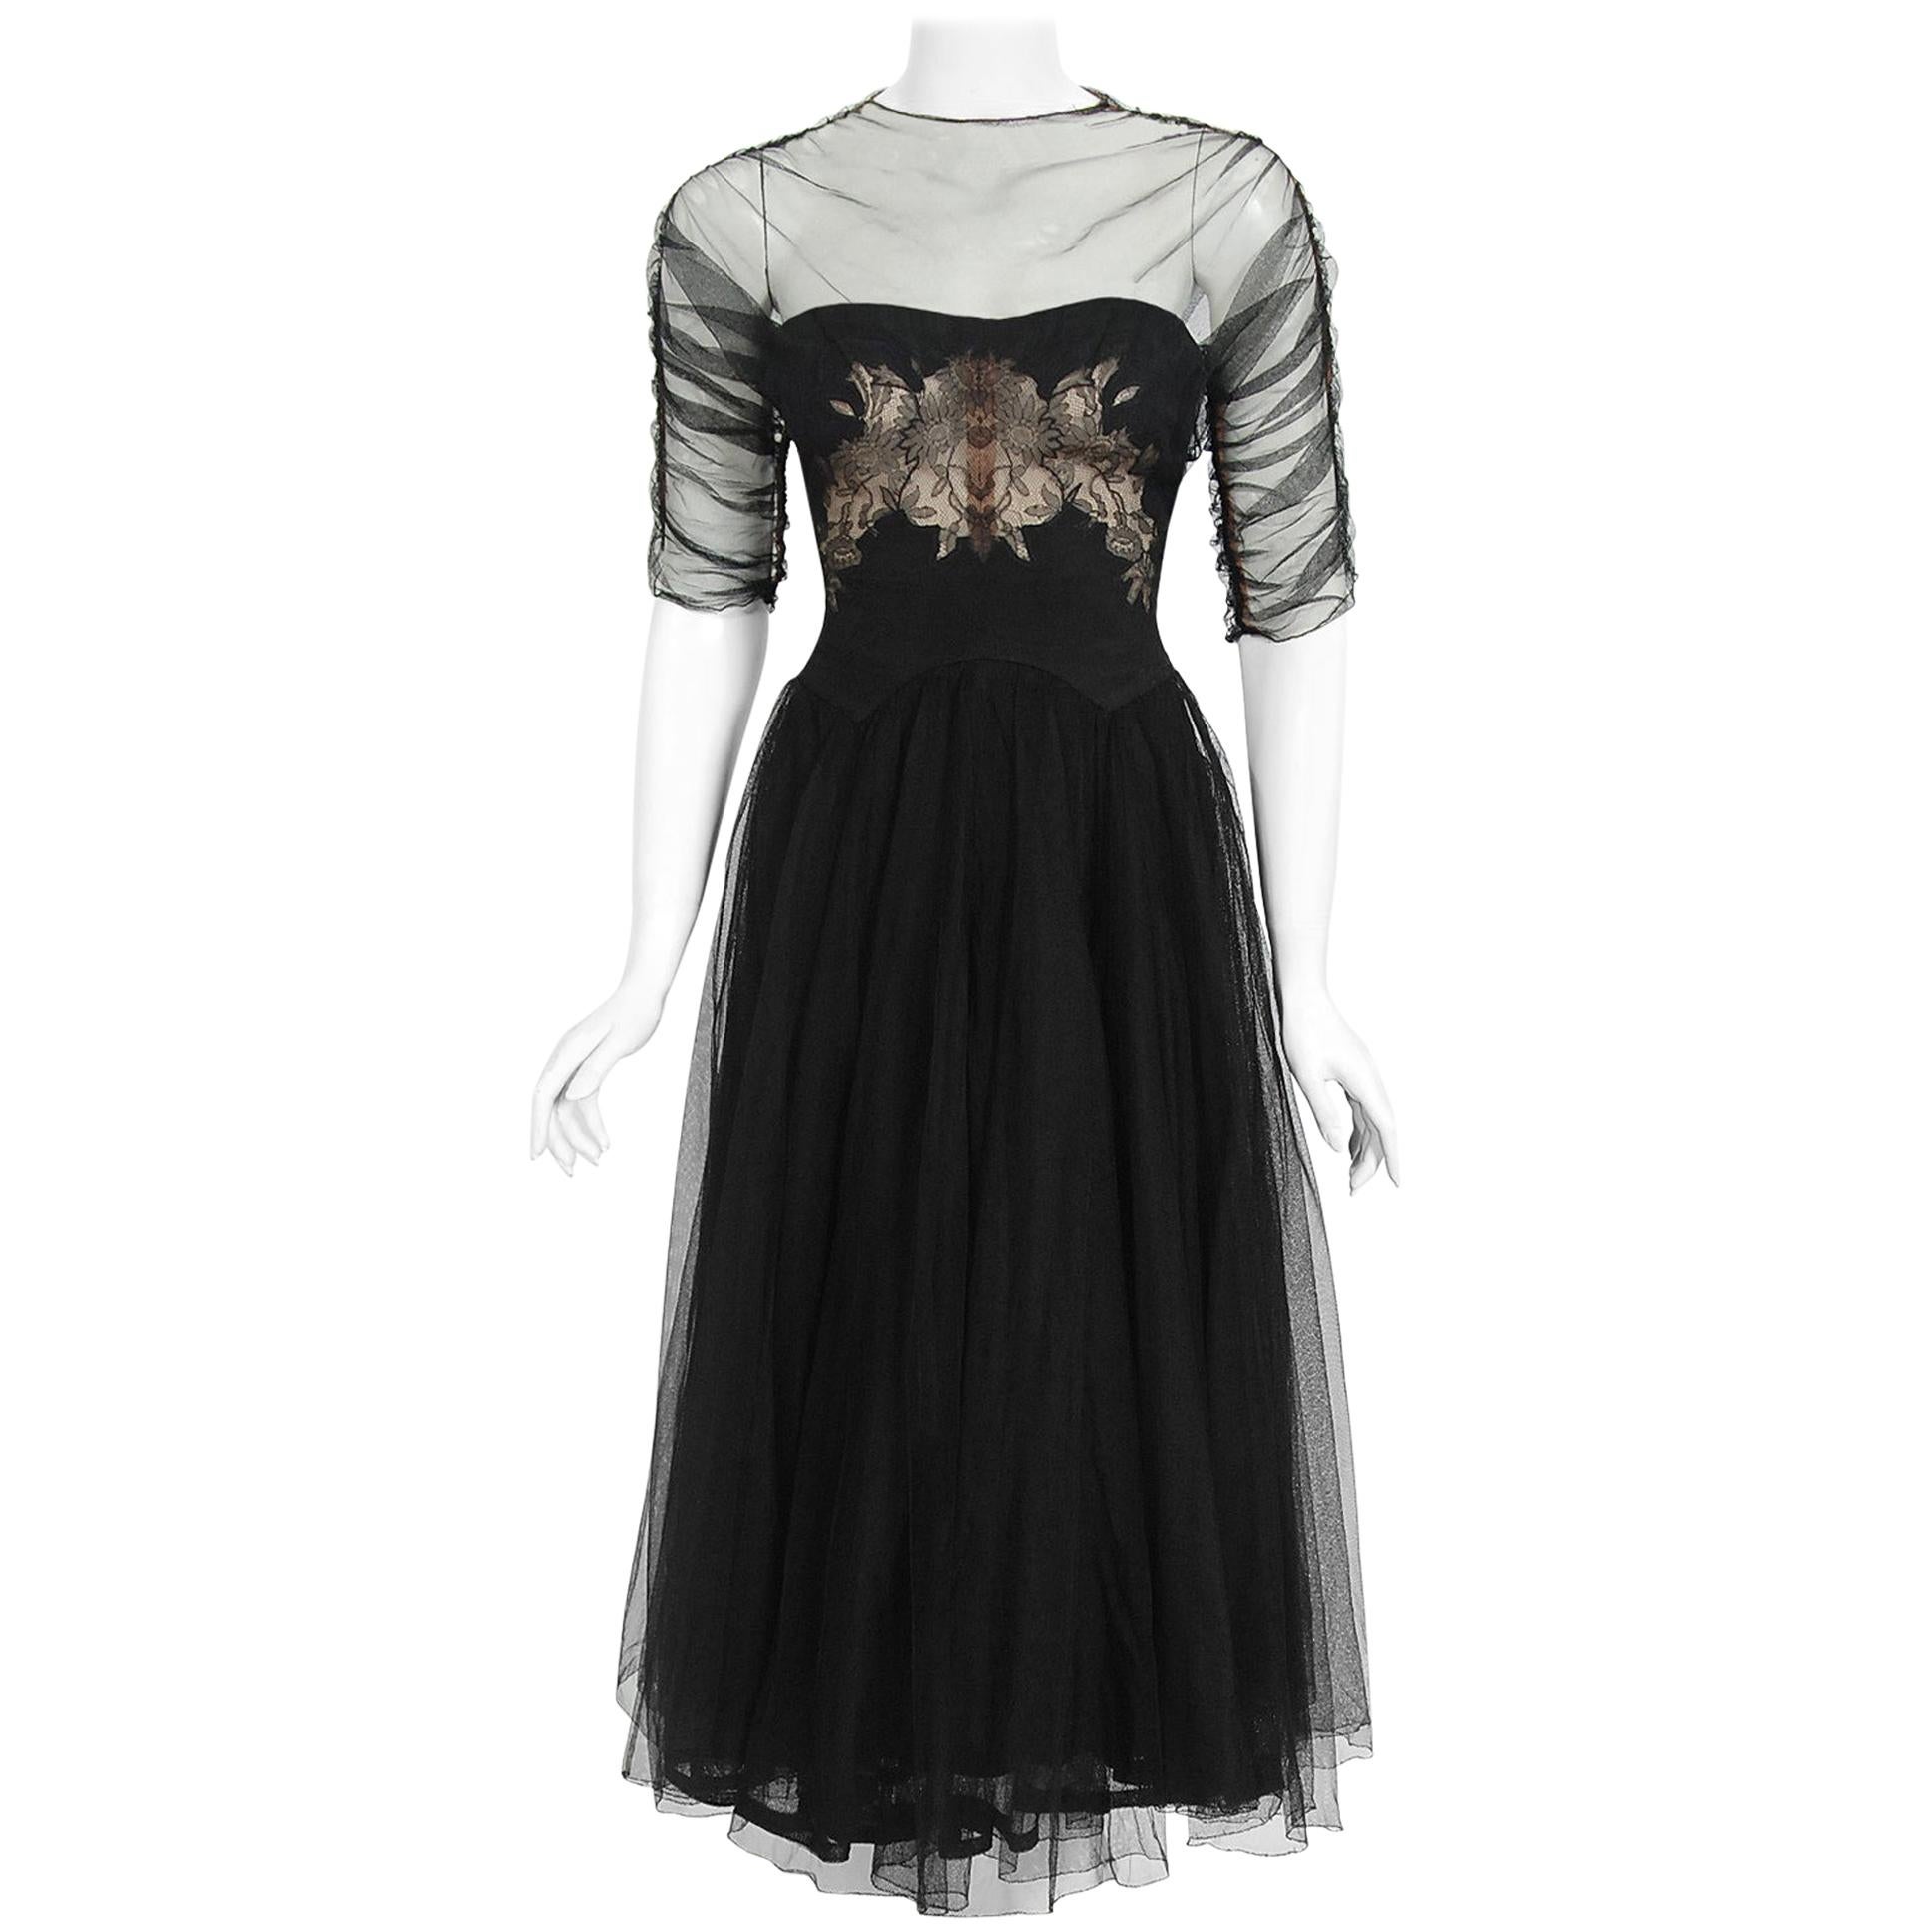 Vintage 1945 Irene Lentz Couture Documented Sheer Net-Tulle Lace Illusion Dress